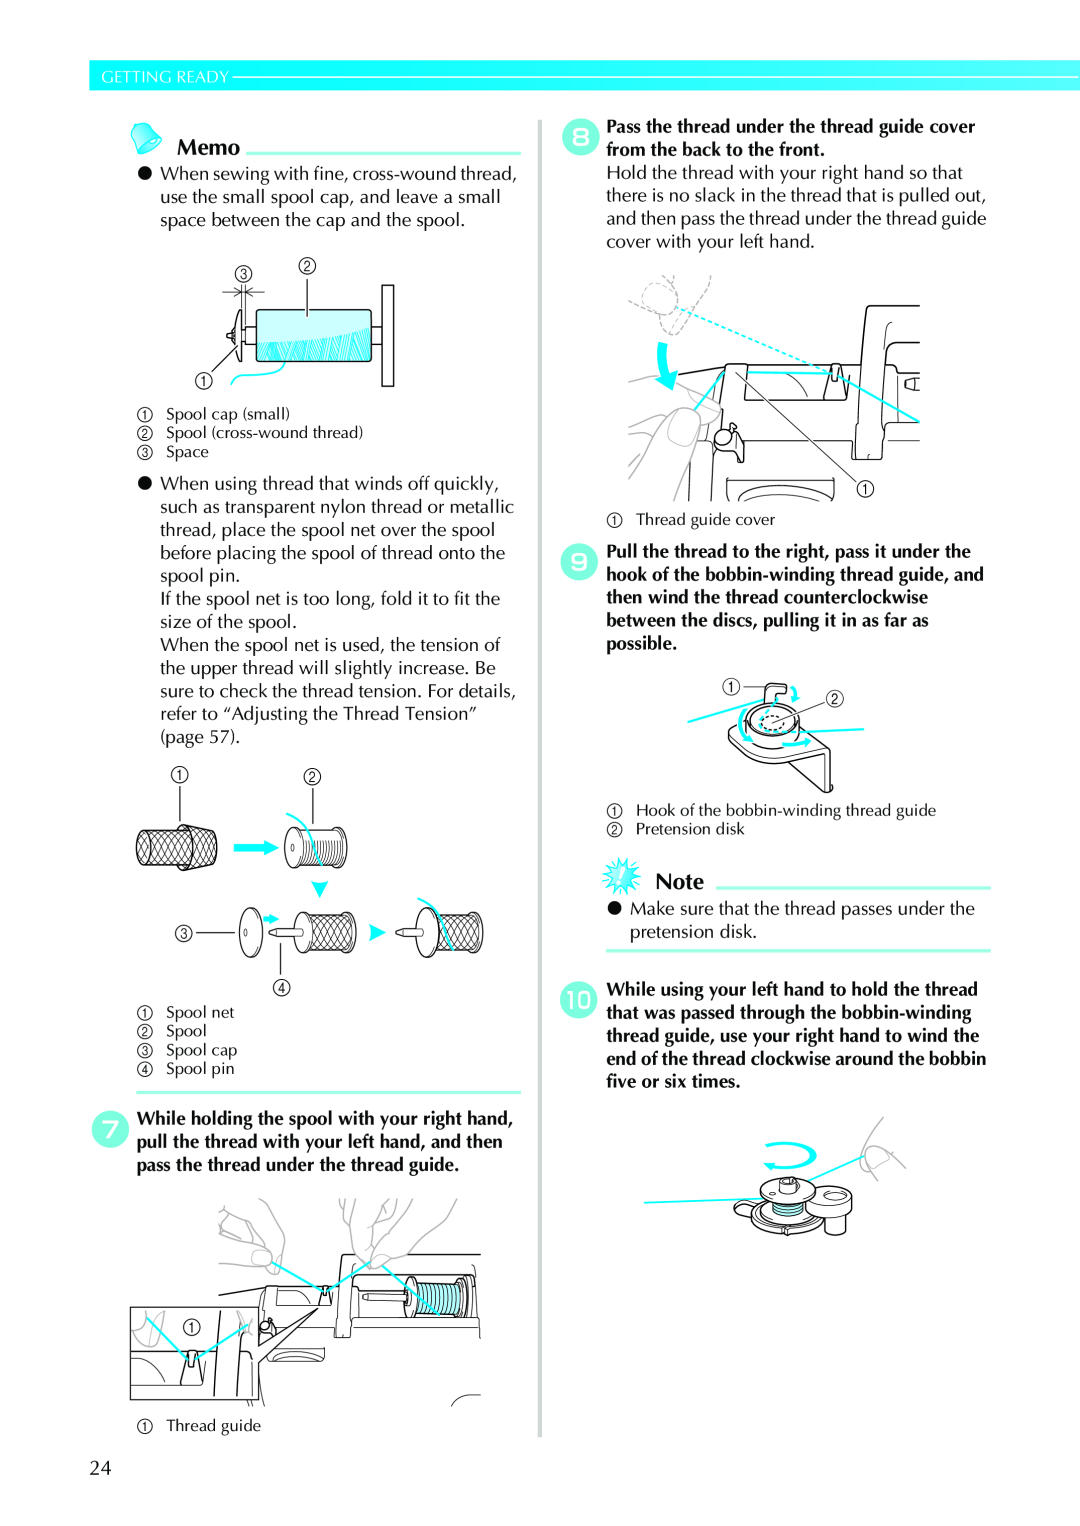 Brother Sewing Machines Memo, Getting Ready, If the spool net is too long, fold it to fit the size of the spool 